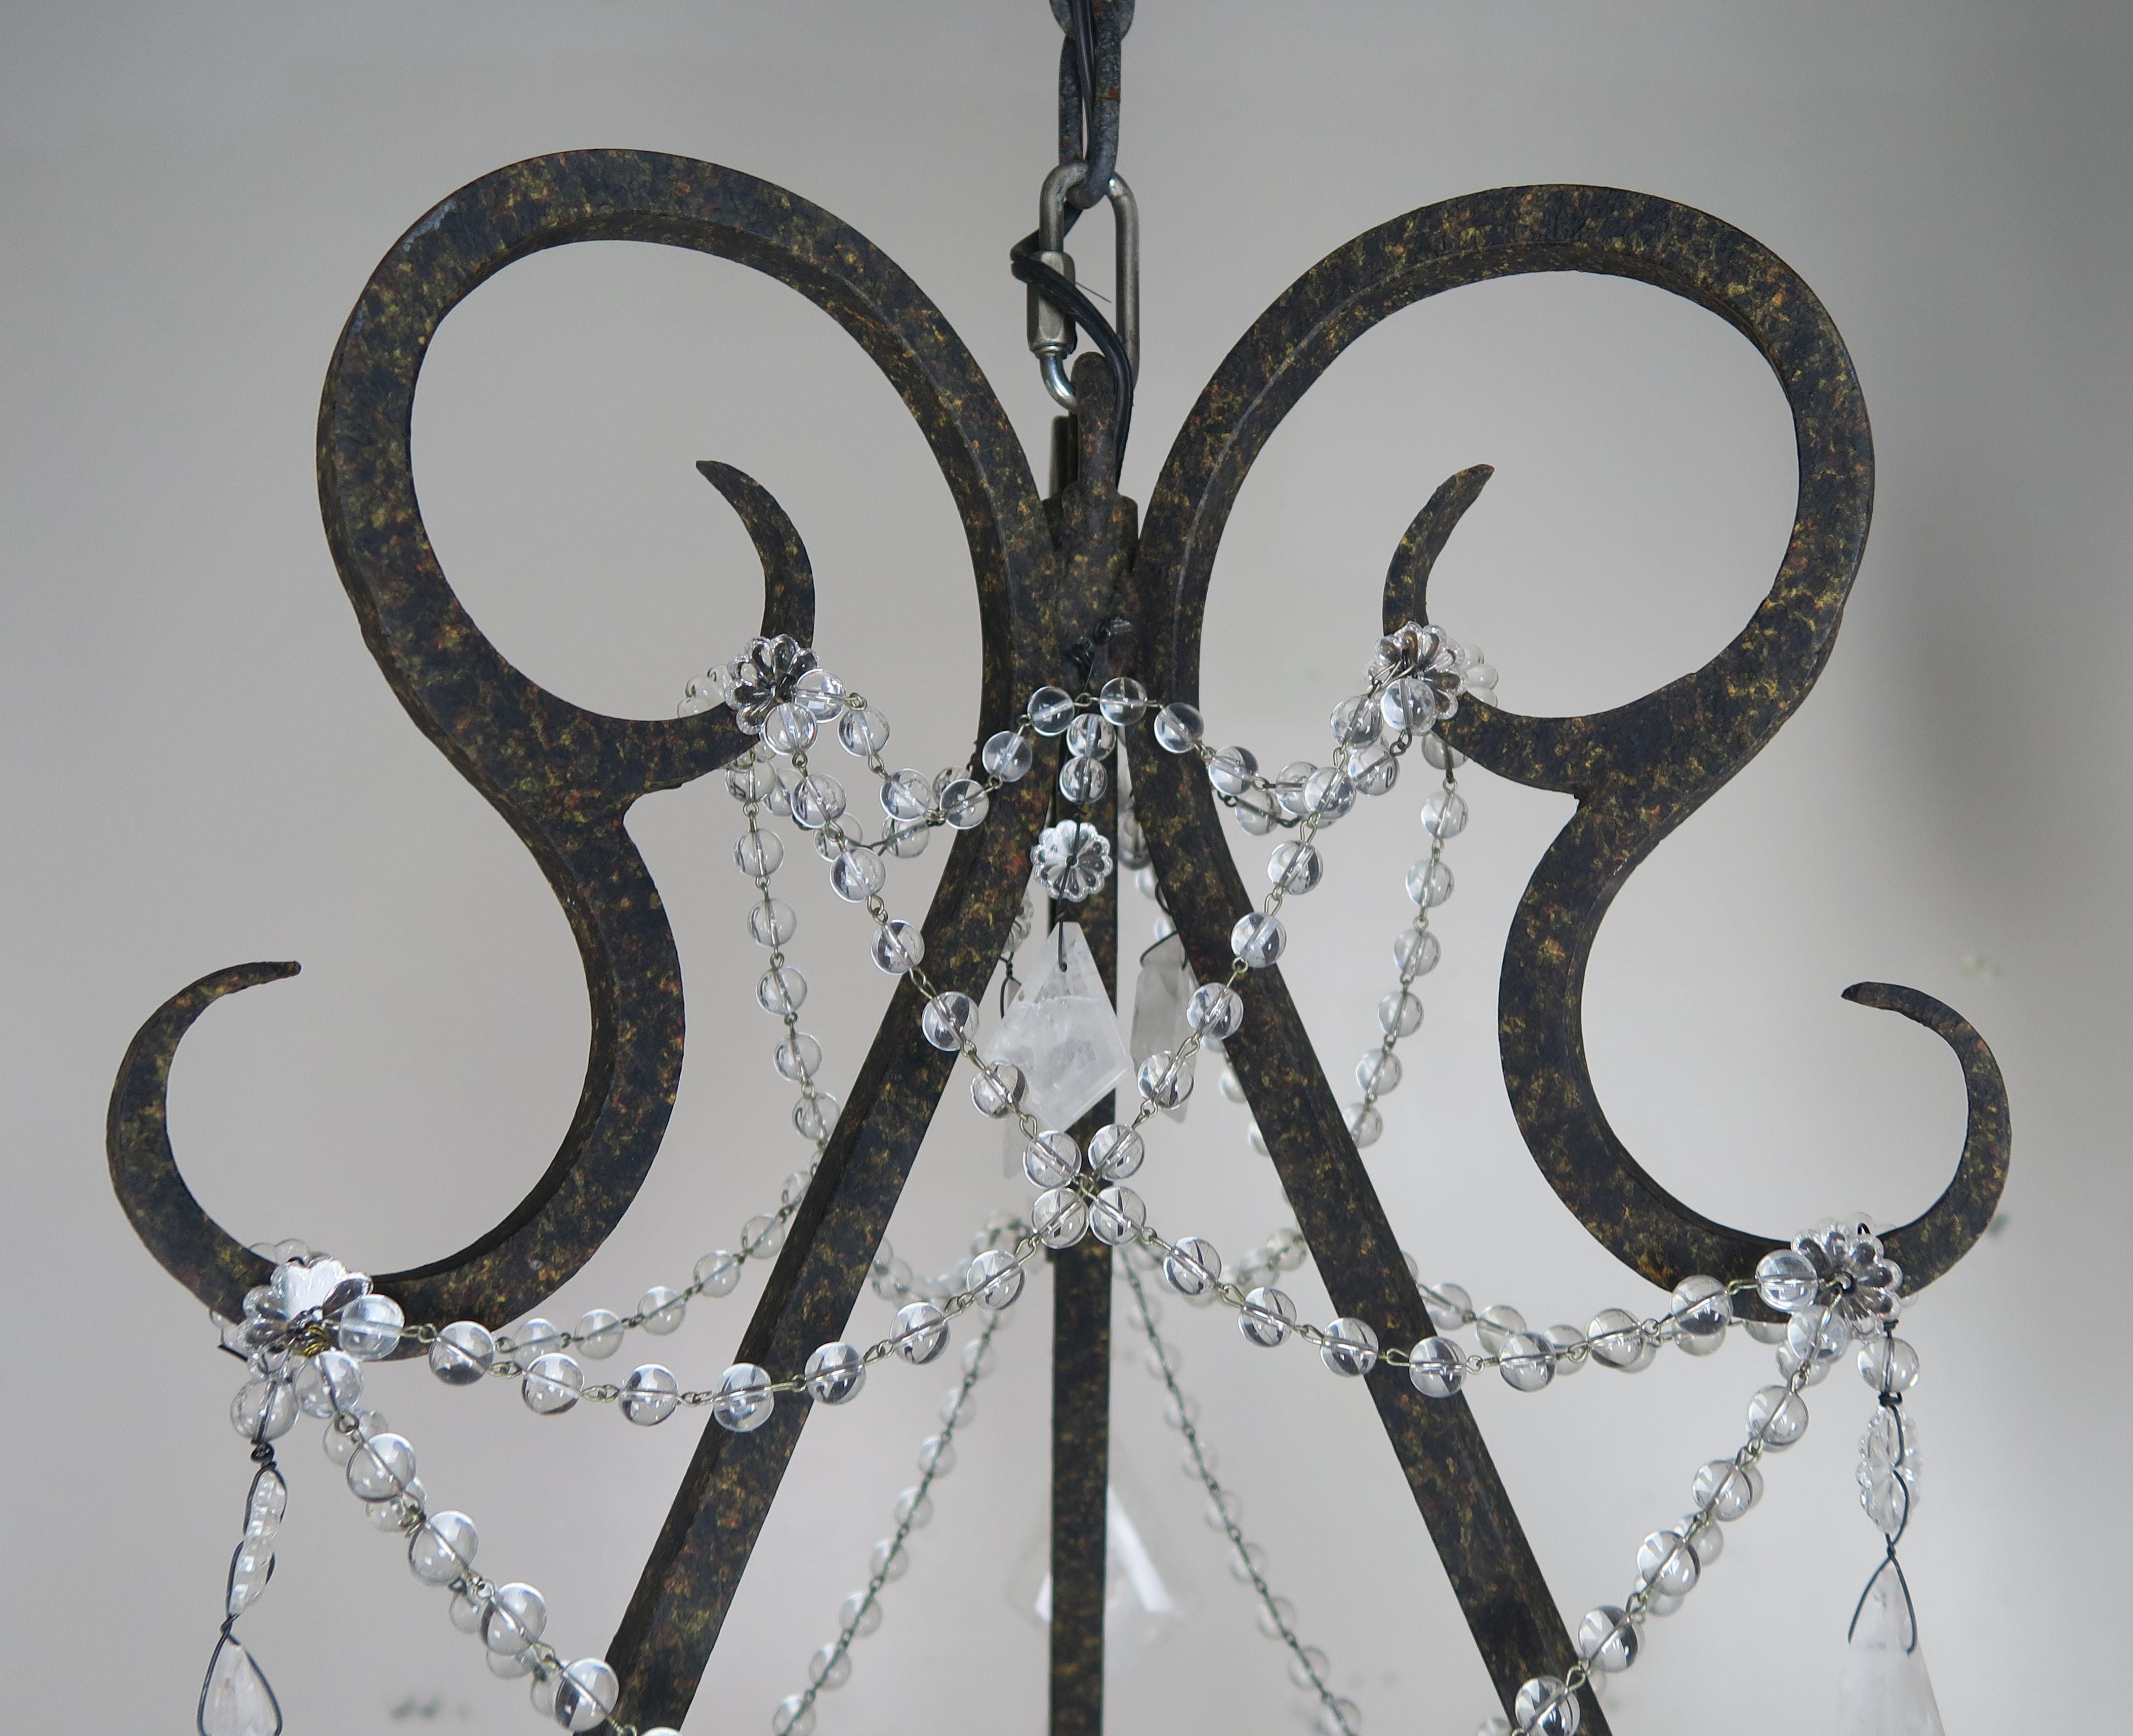 20th century handwrought iron six light chandelier adorned with rock crystal pendulum shaped drops and garlands of crystal beads throughout. Center crystal finial. This fixture is newly rewired with drip wax candle covers and includes chain and